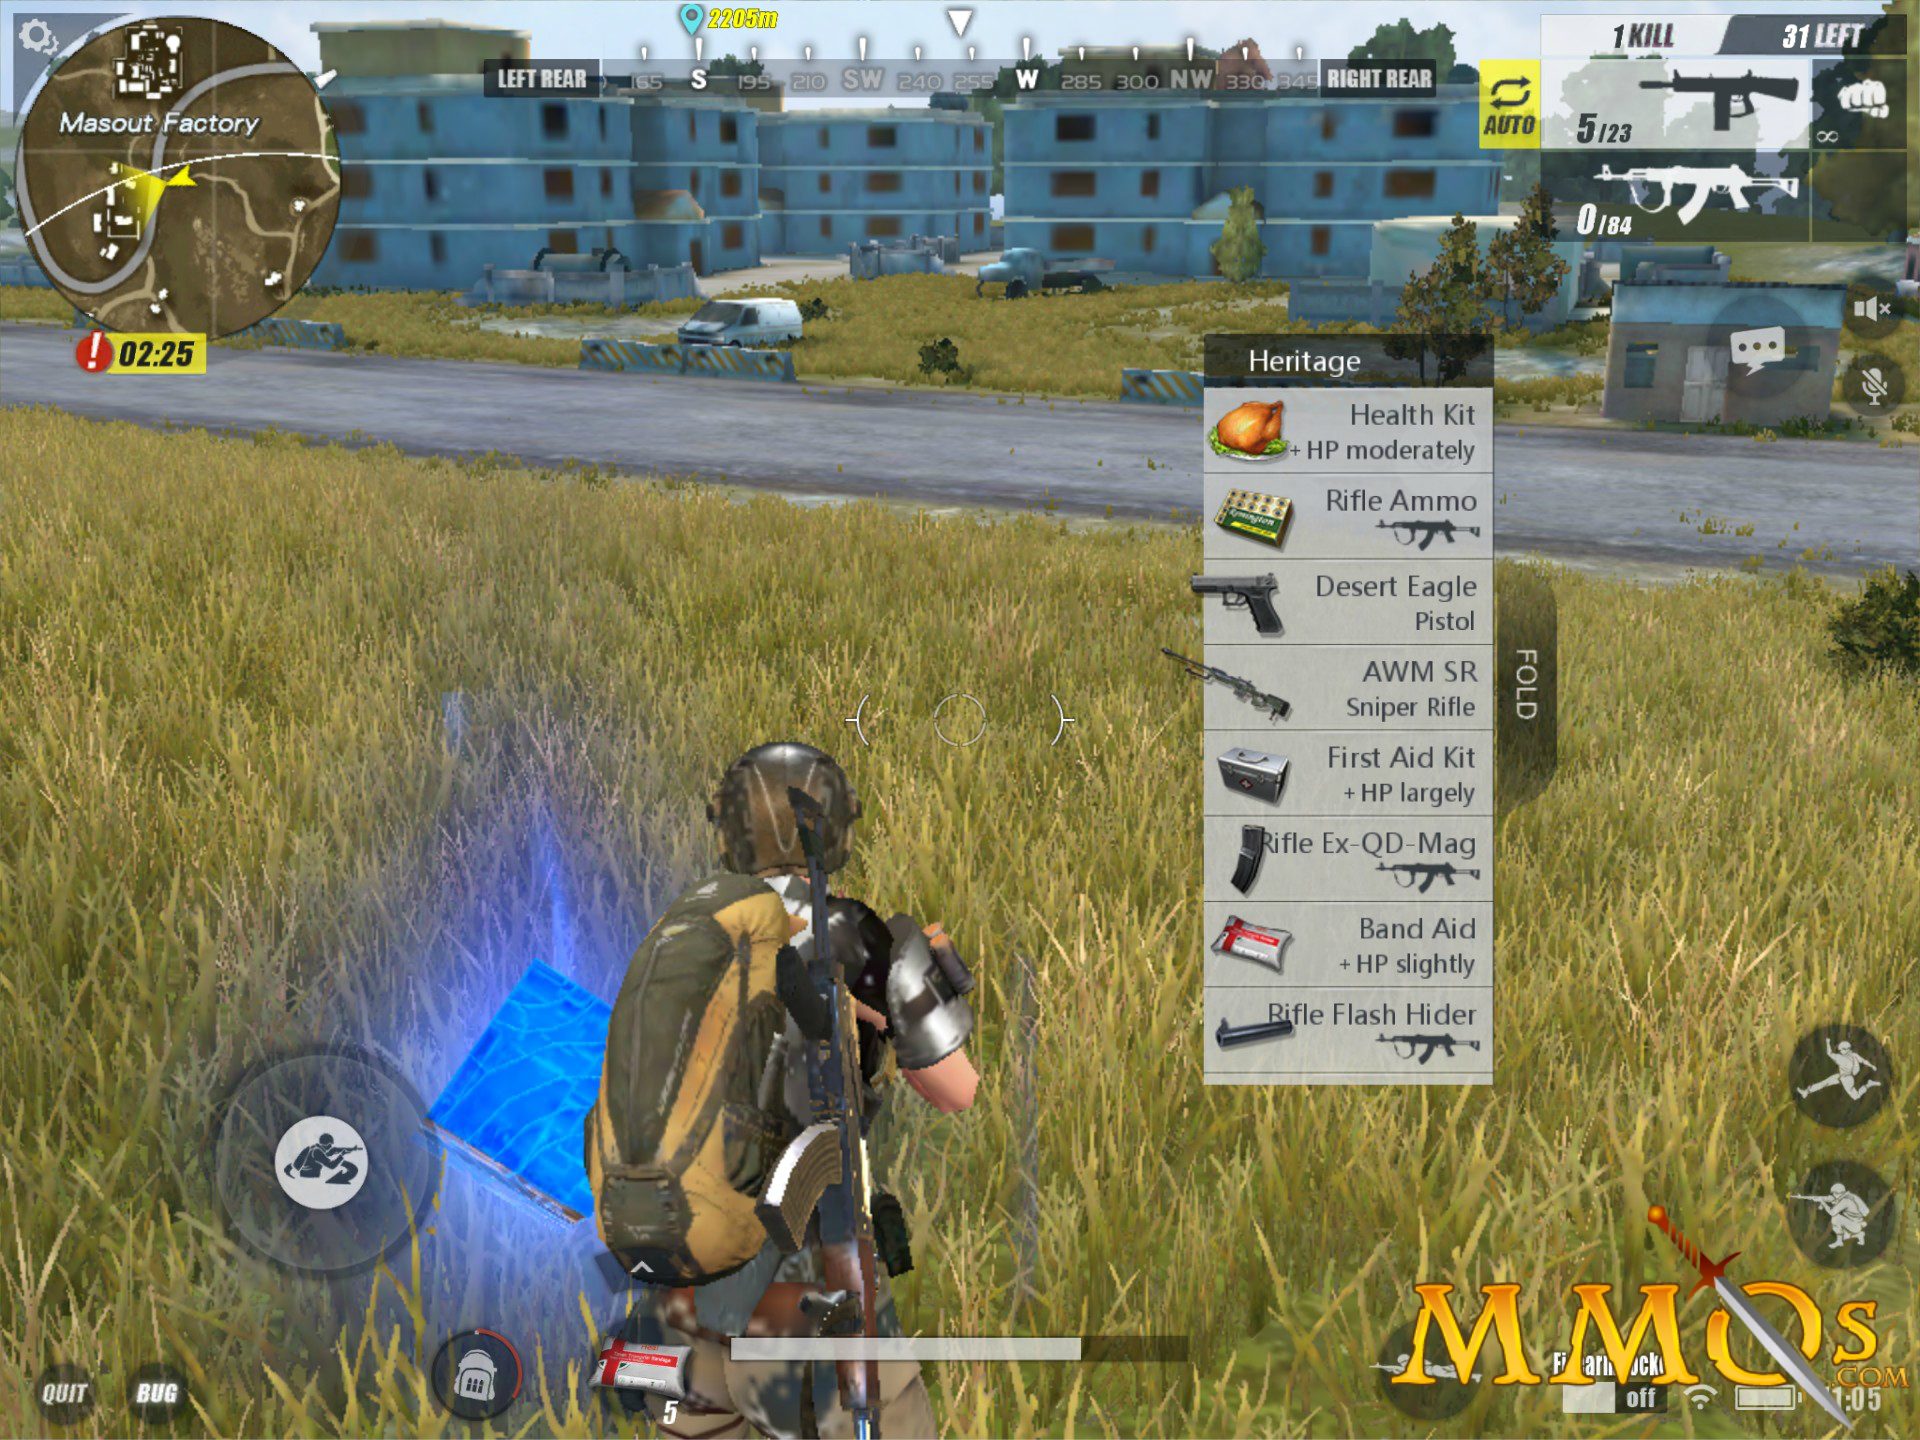 rules of survival game mac